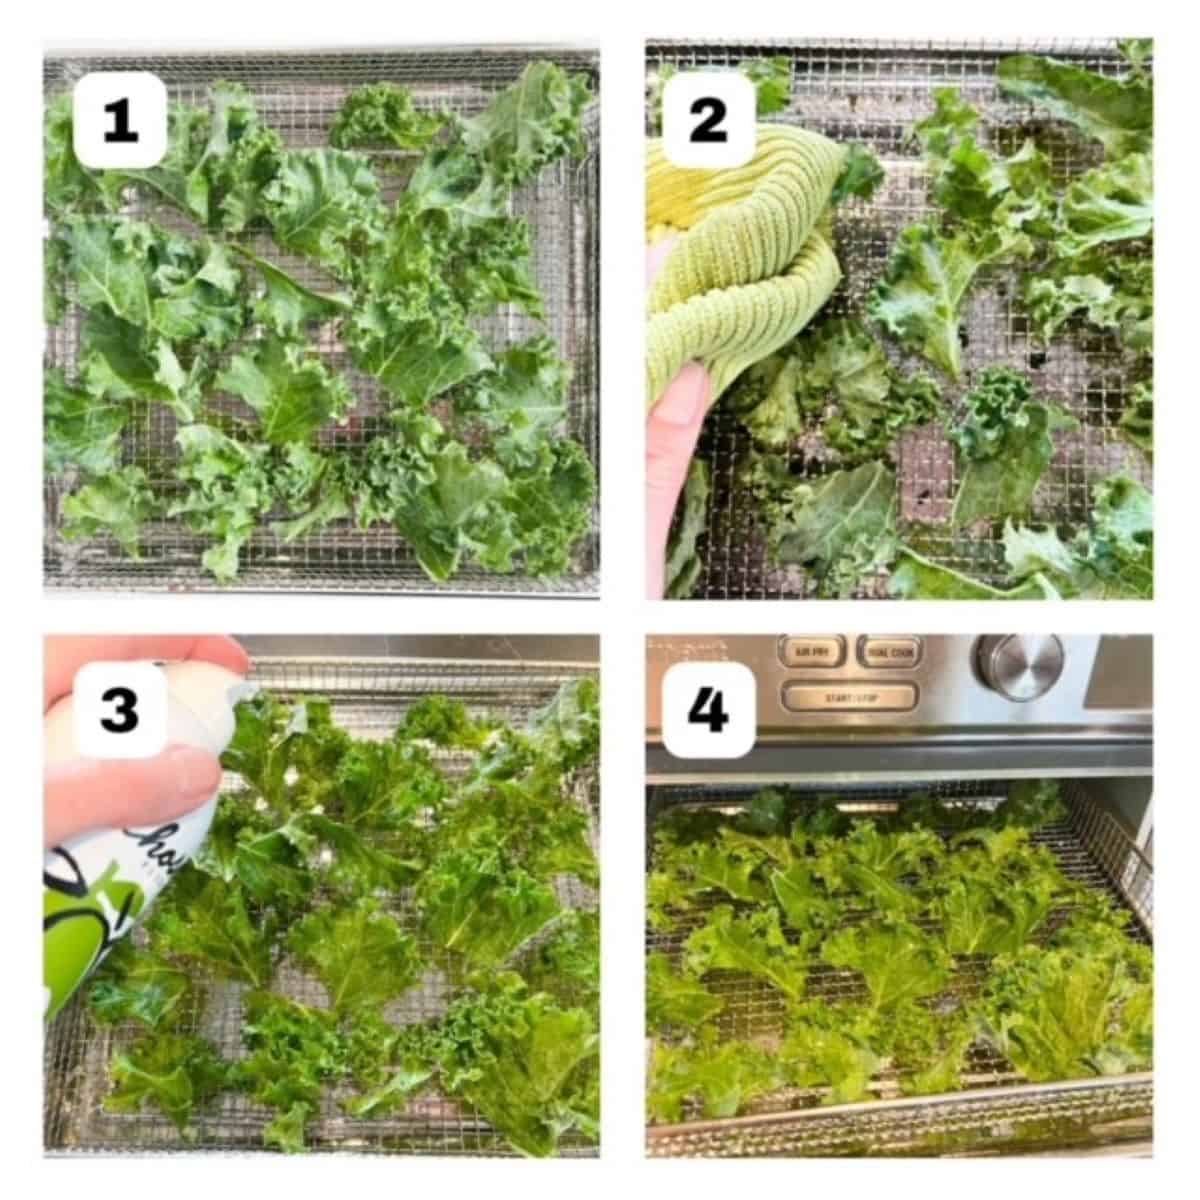 Four process shots showing steps to make kale chips in an air fryer.